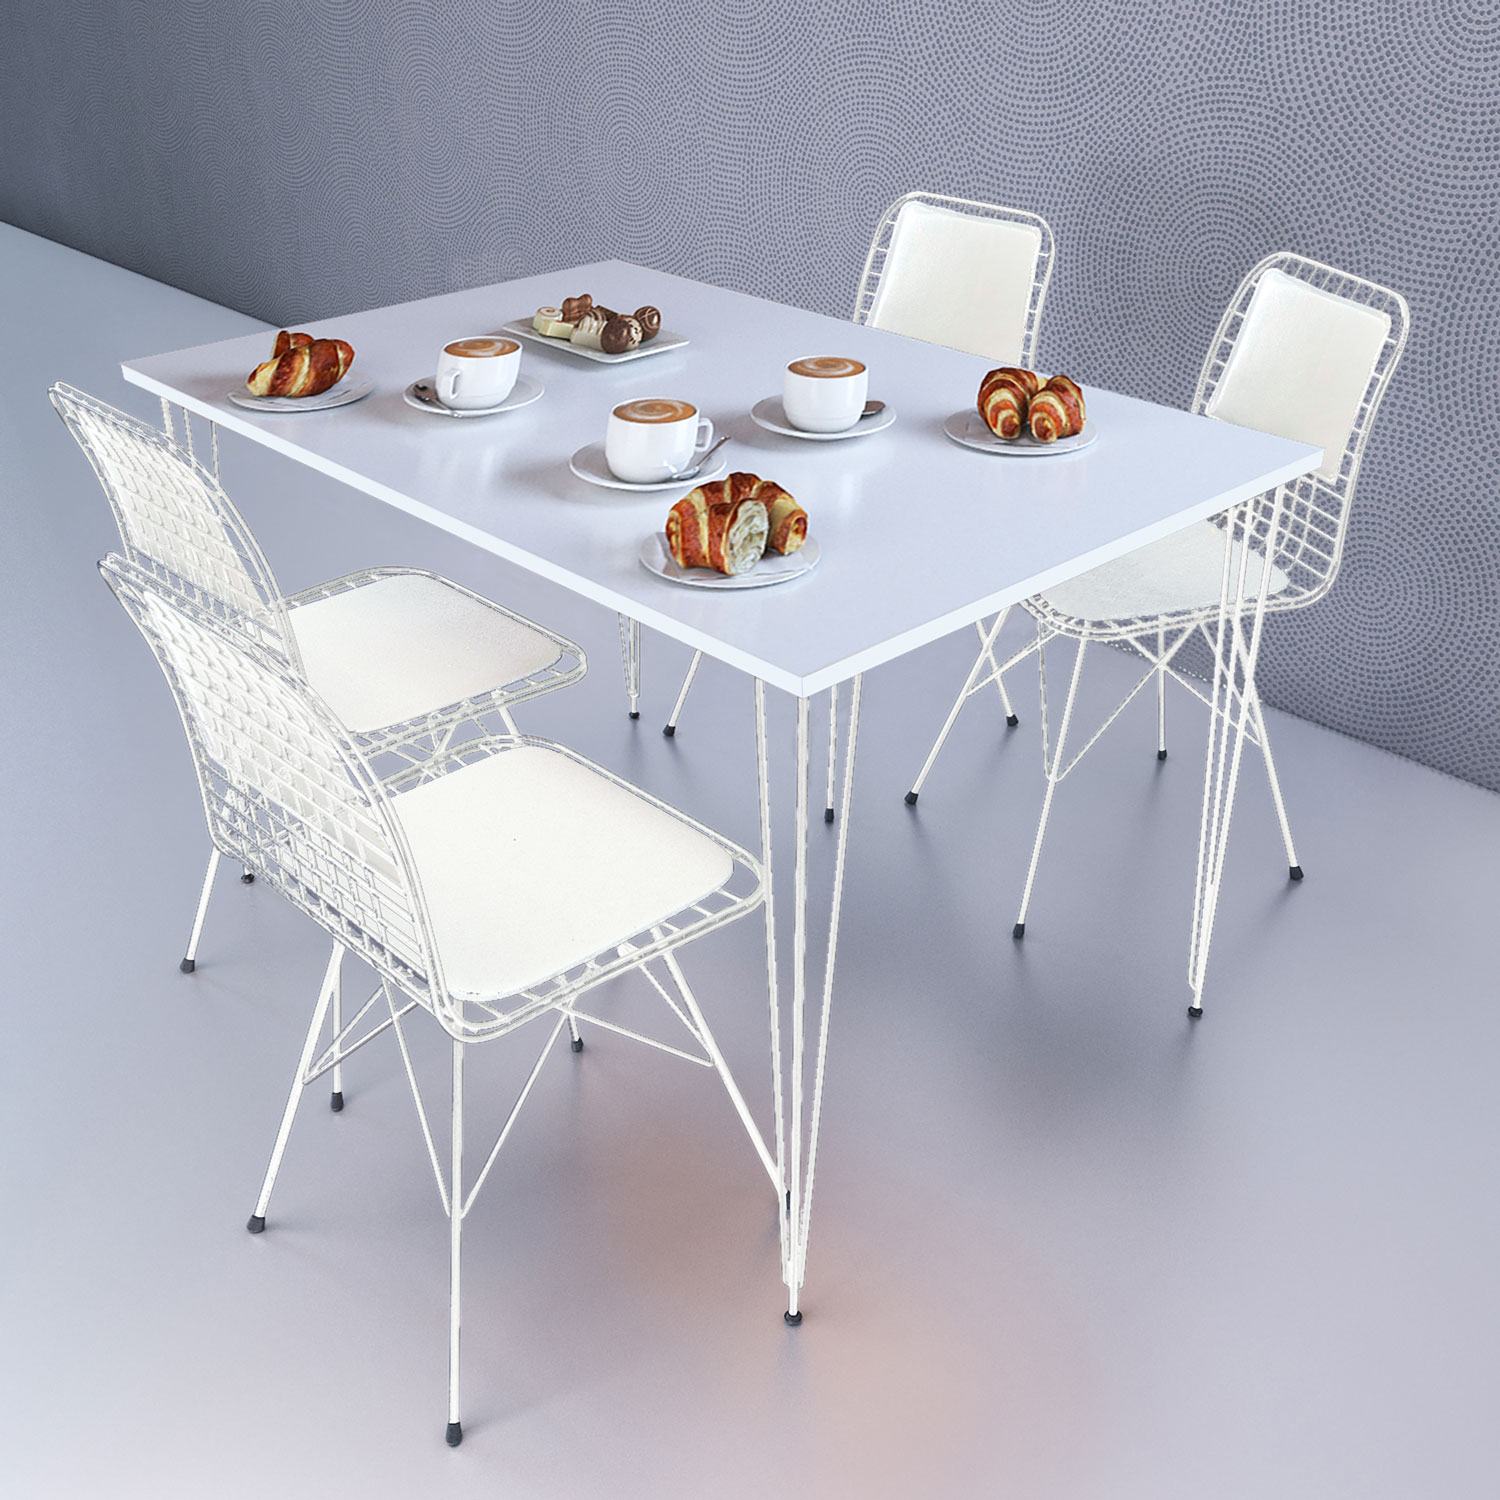 4 Person 130X70 White Table Set + 4 Wire Chairs with Back Cushion